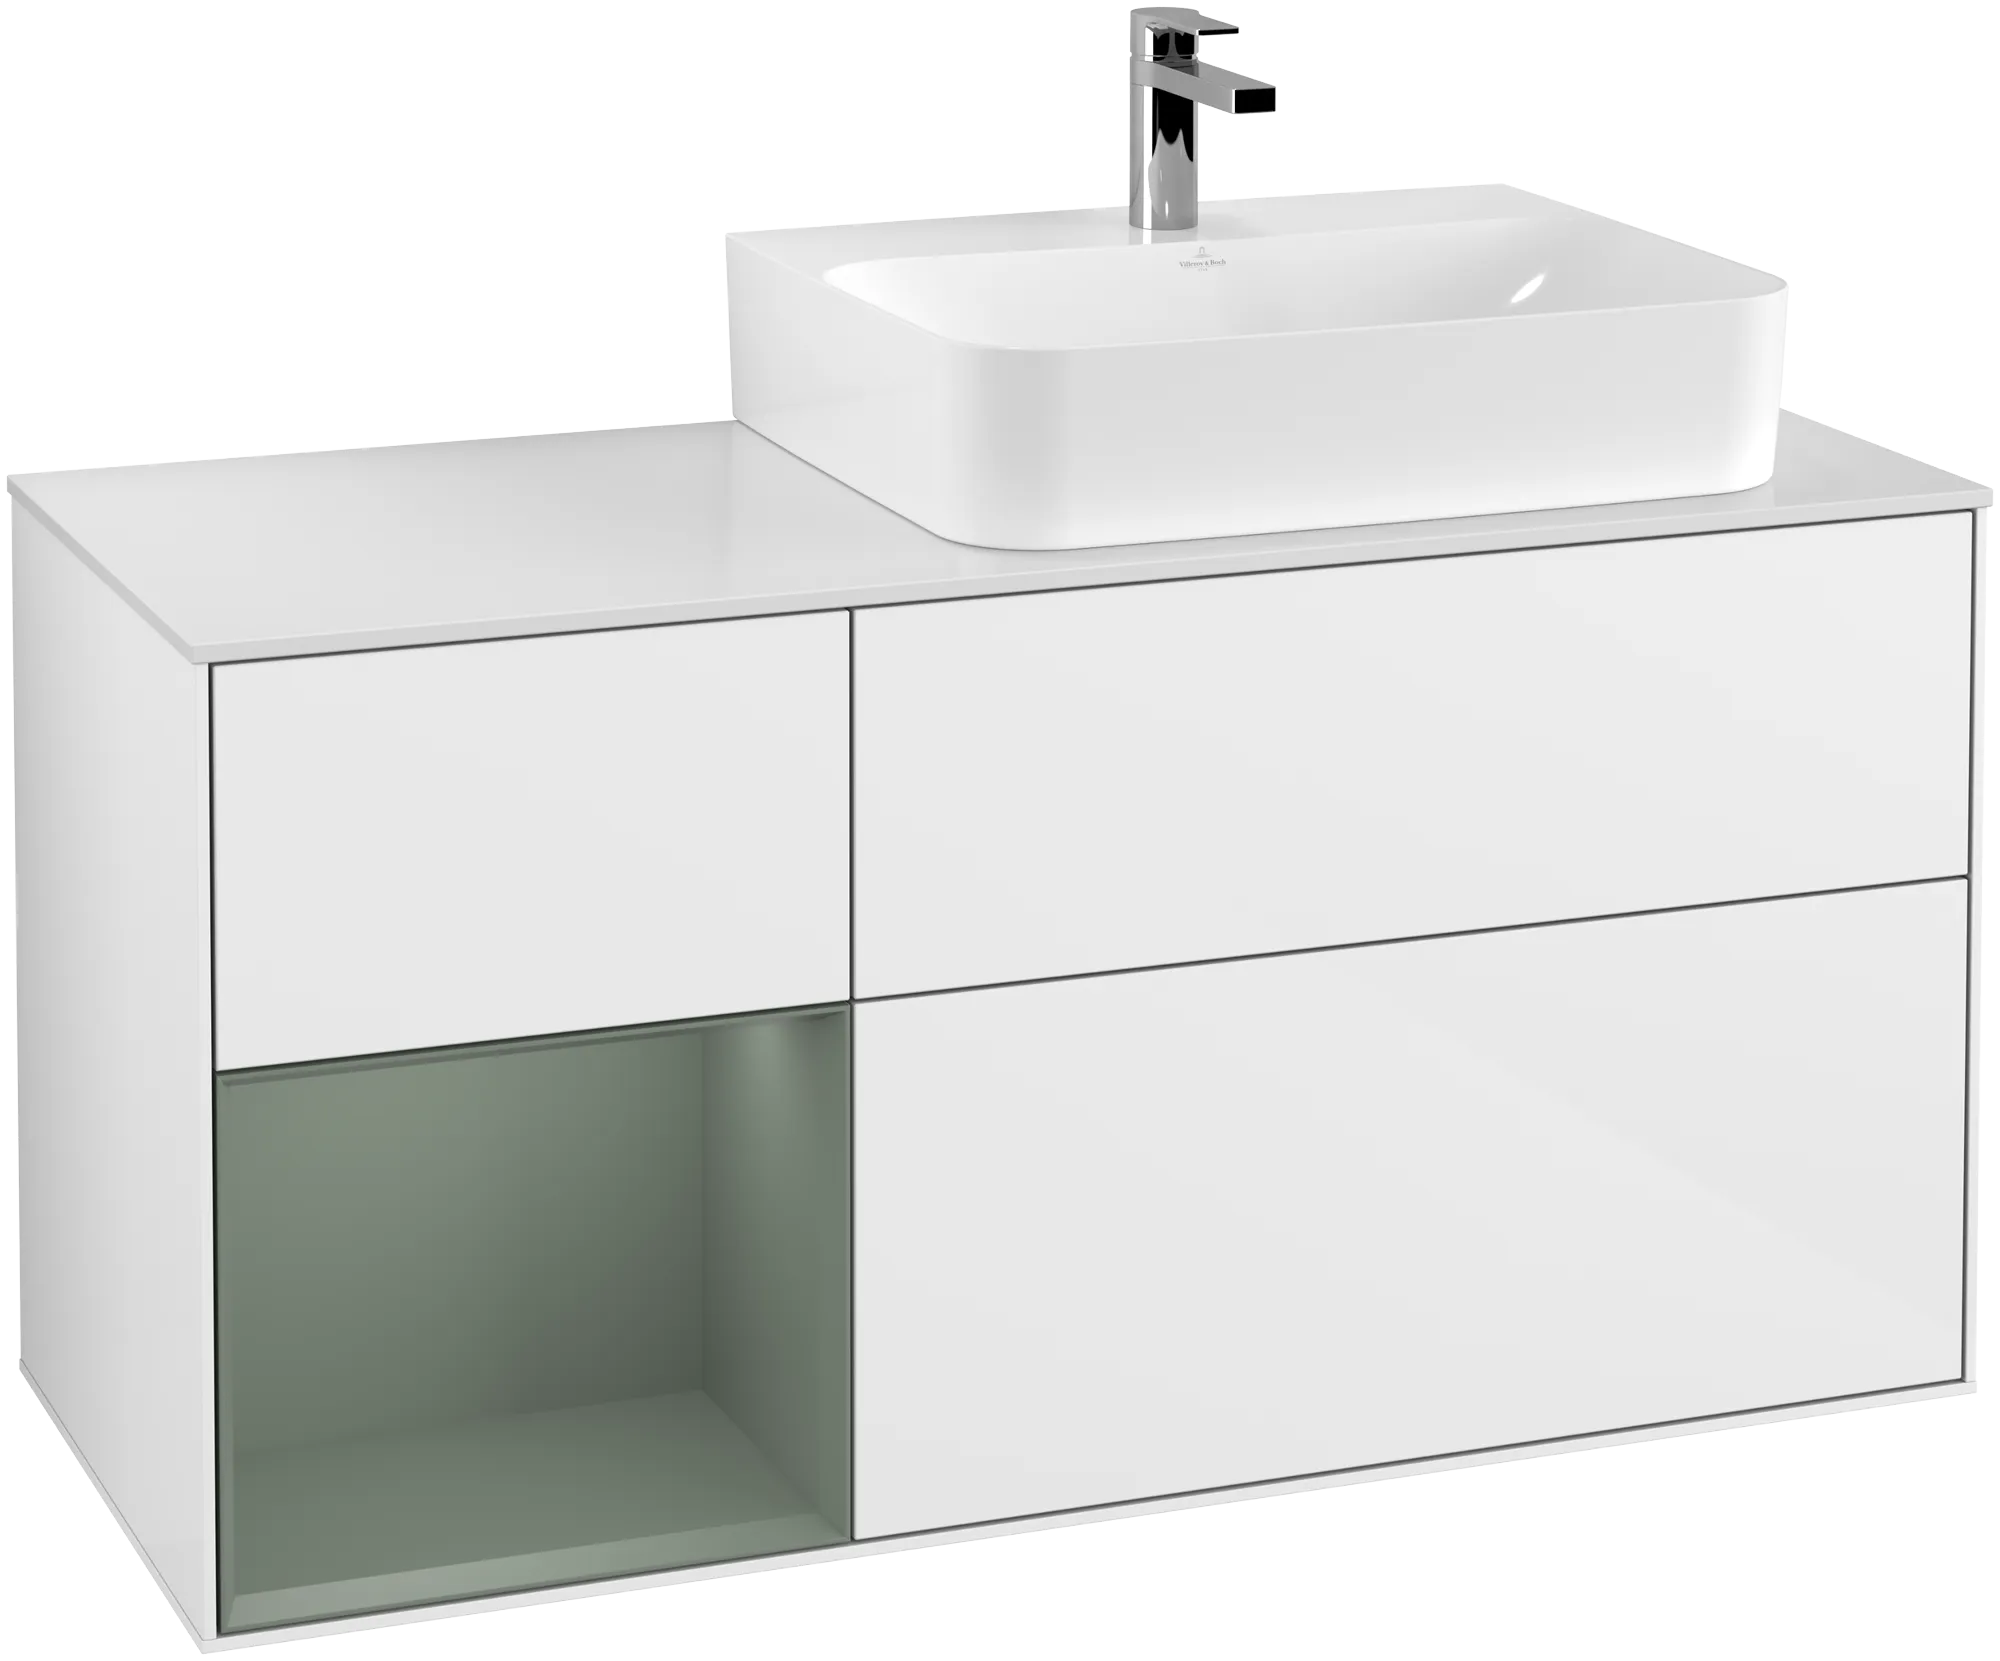 Picture of VILLEROY BOCH Finion Vanity unit, with lighting, 3 pull-out compartments, 1200 x 603 x 501 mm, Glossy White Lacquer / Olive Matt Lacquer / Glass White Matt #G141GMGF